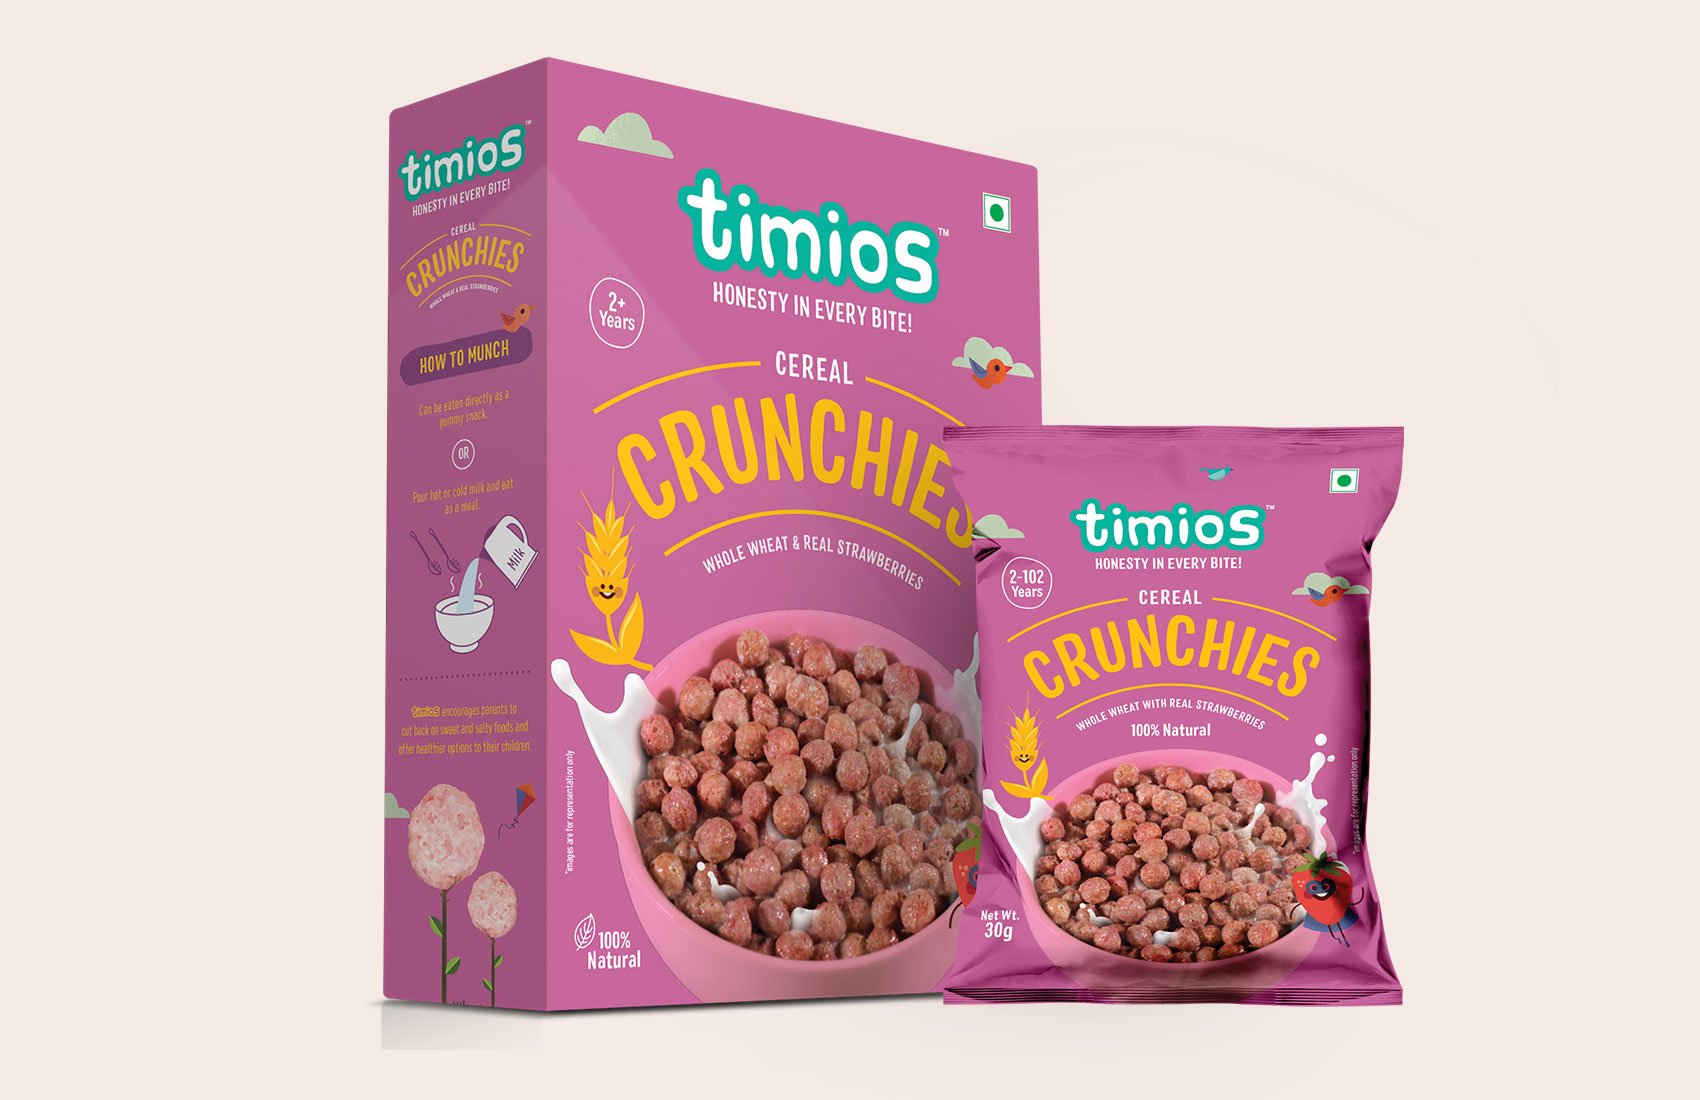 http://elebird.com/project/timios-product-packaging/